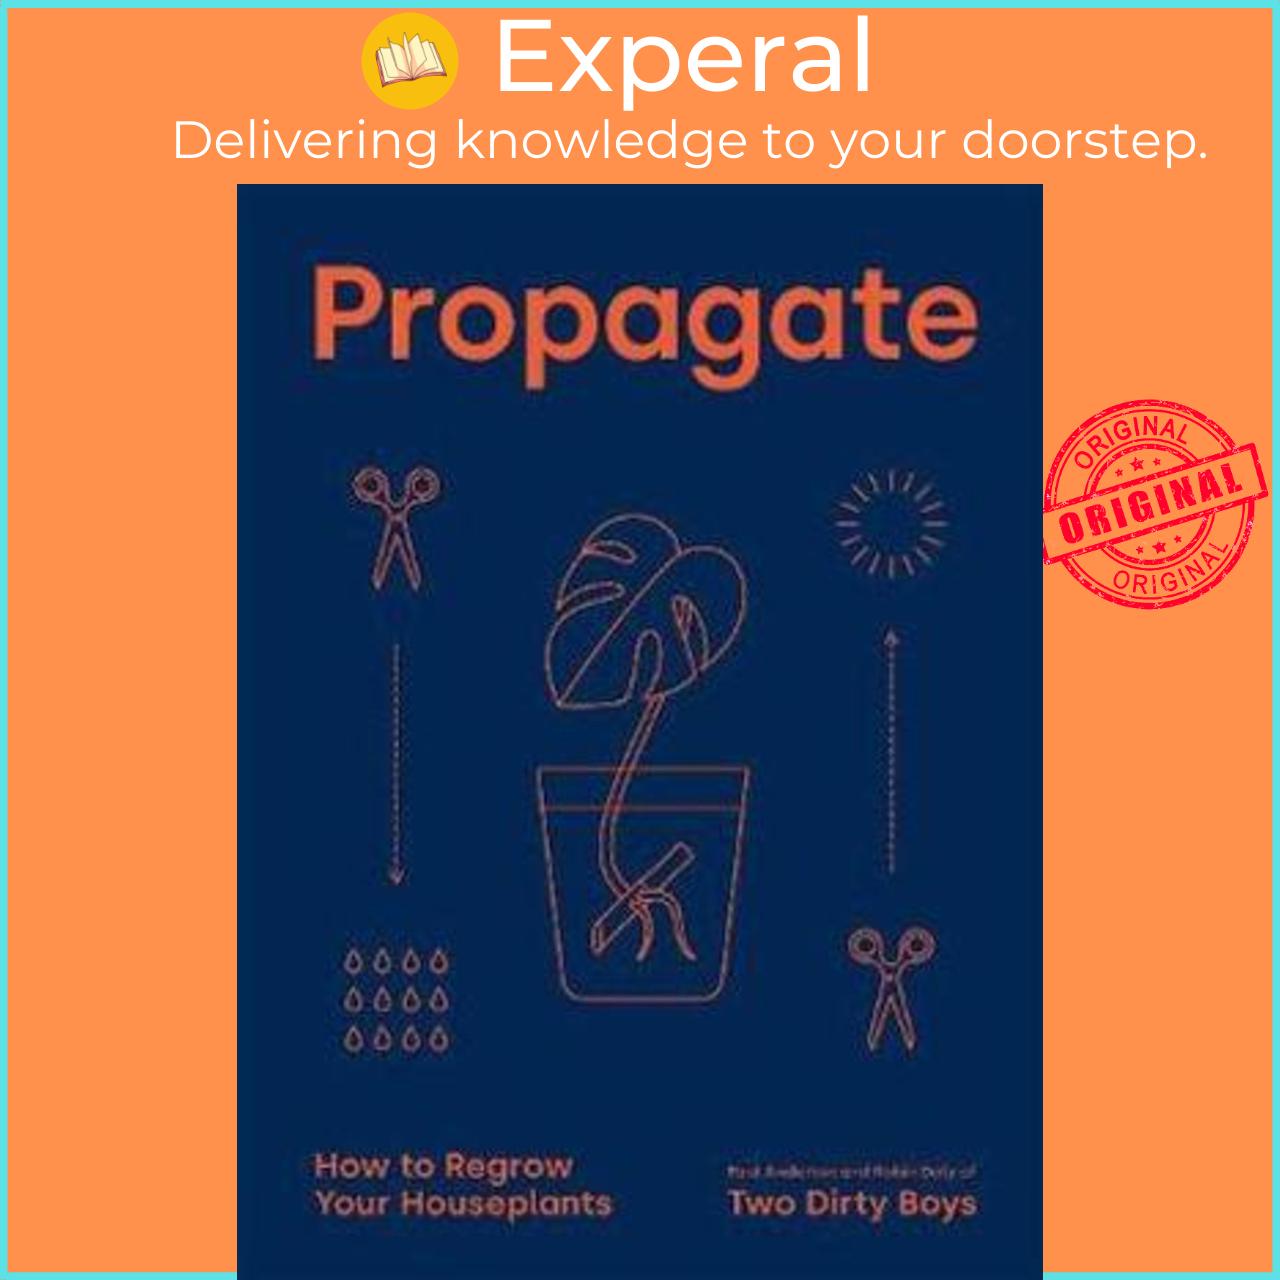 Sách - Propagate : How to Regrow your Houseplants by Paul Anderton (UK edition, hardcover)